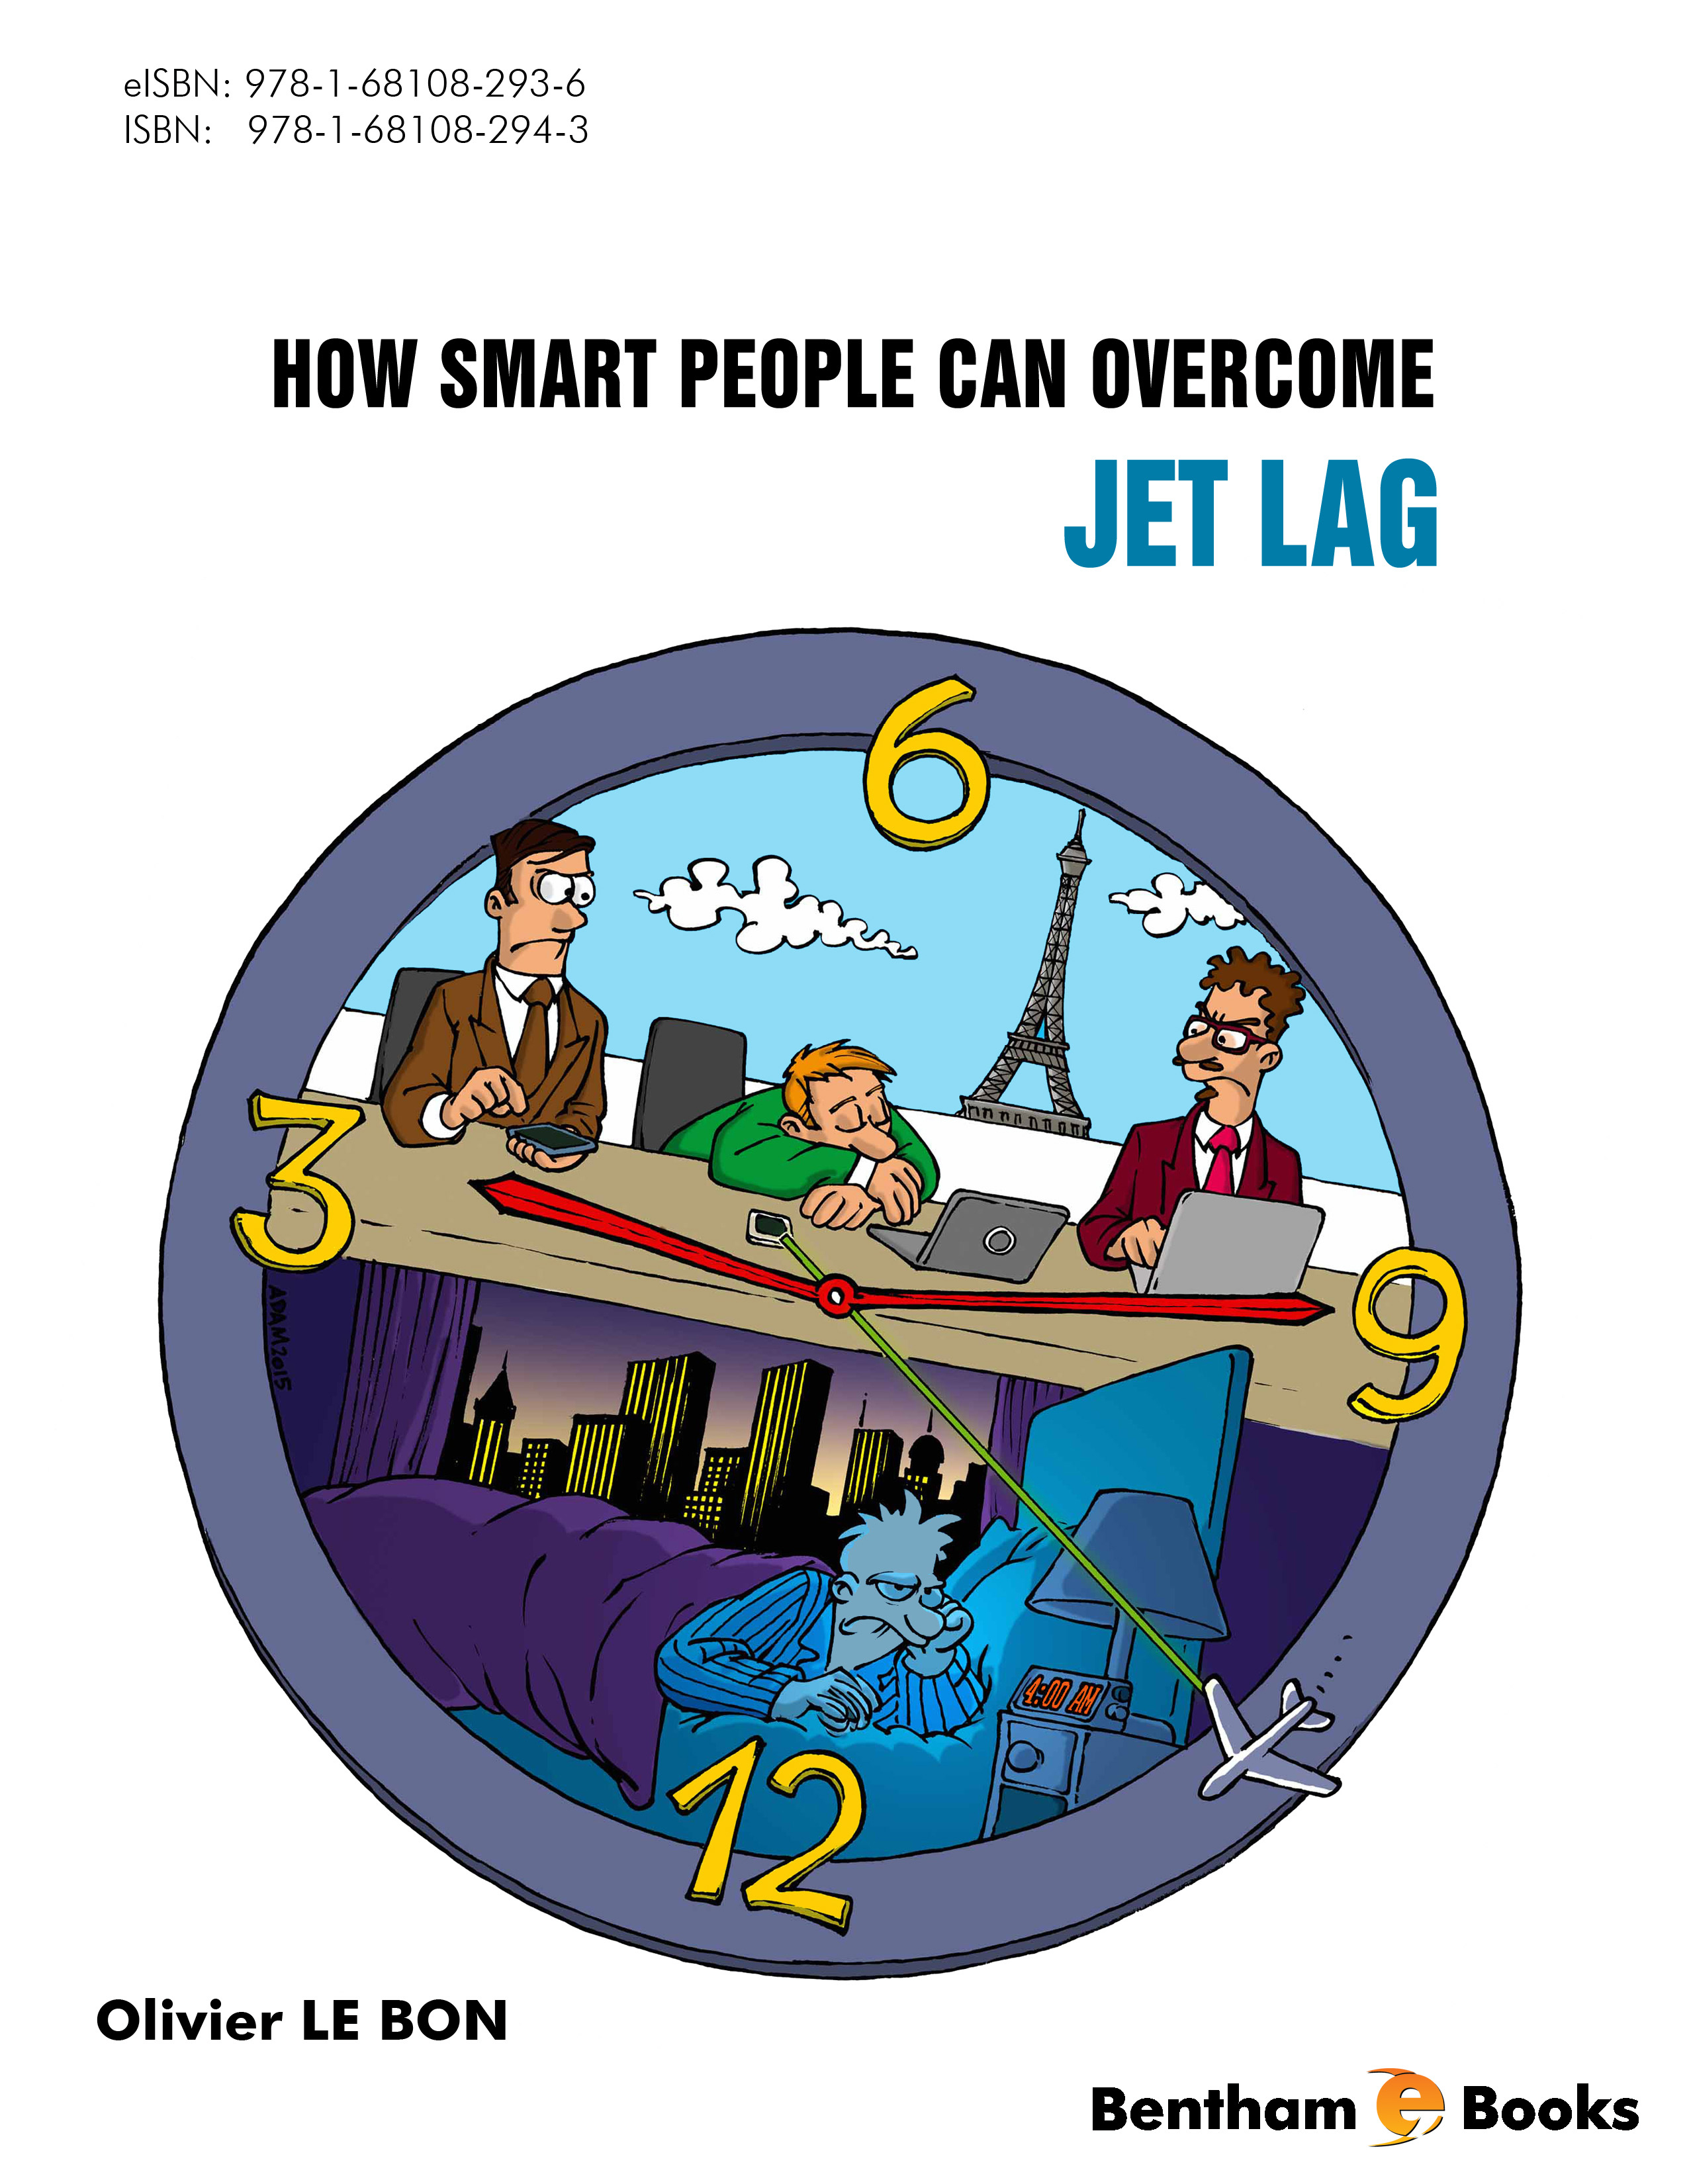 How Smart People Can Overcome JET LAG